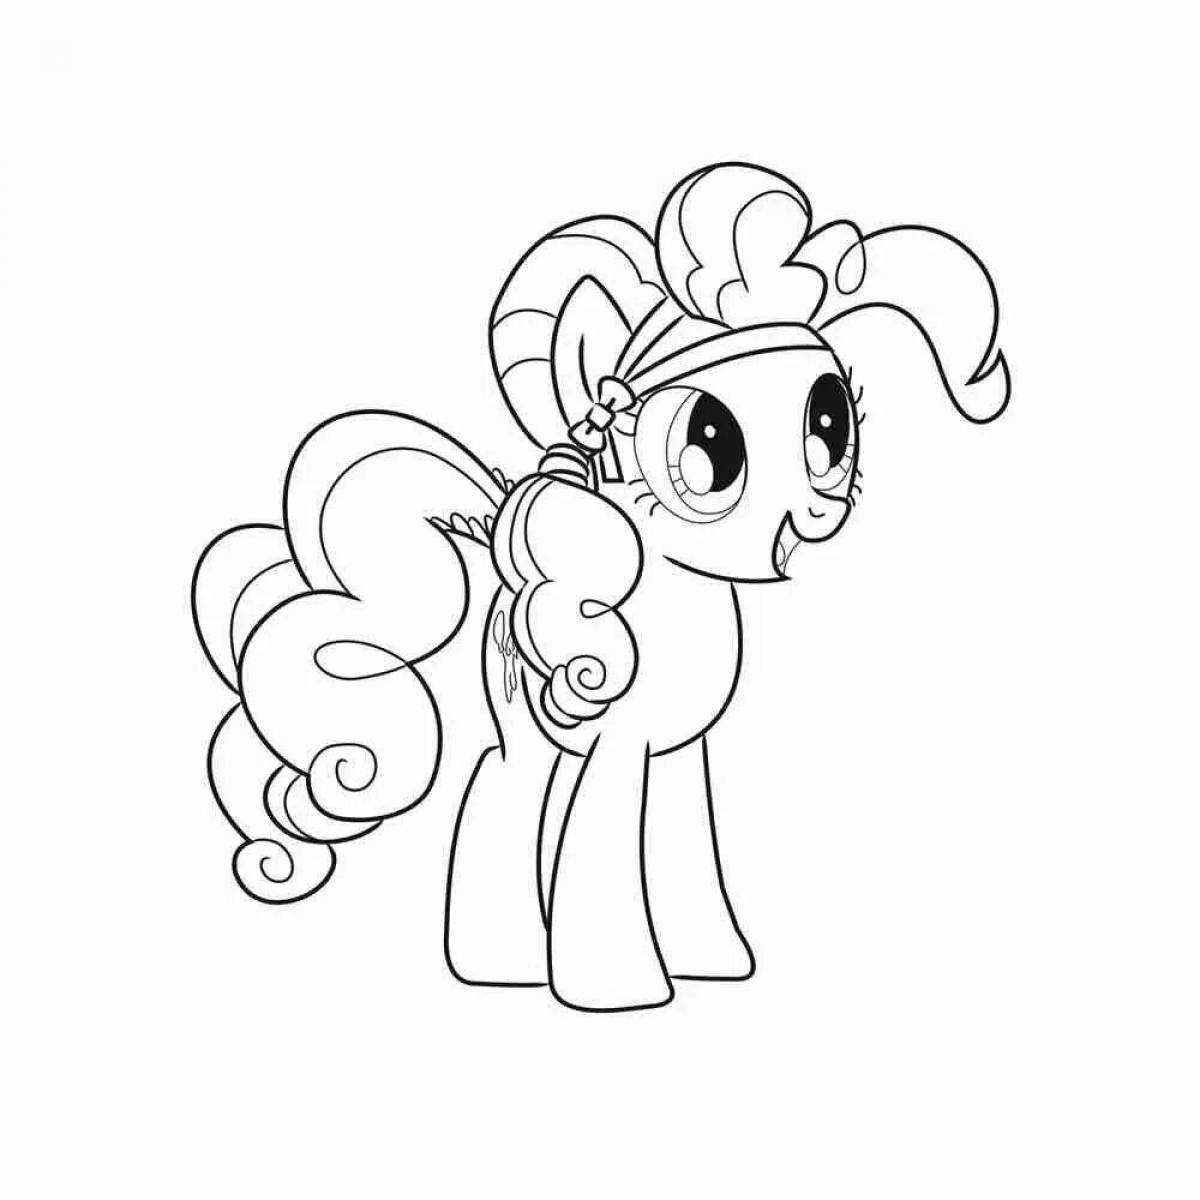 Pinky pie pony coloring page